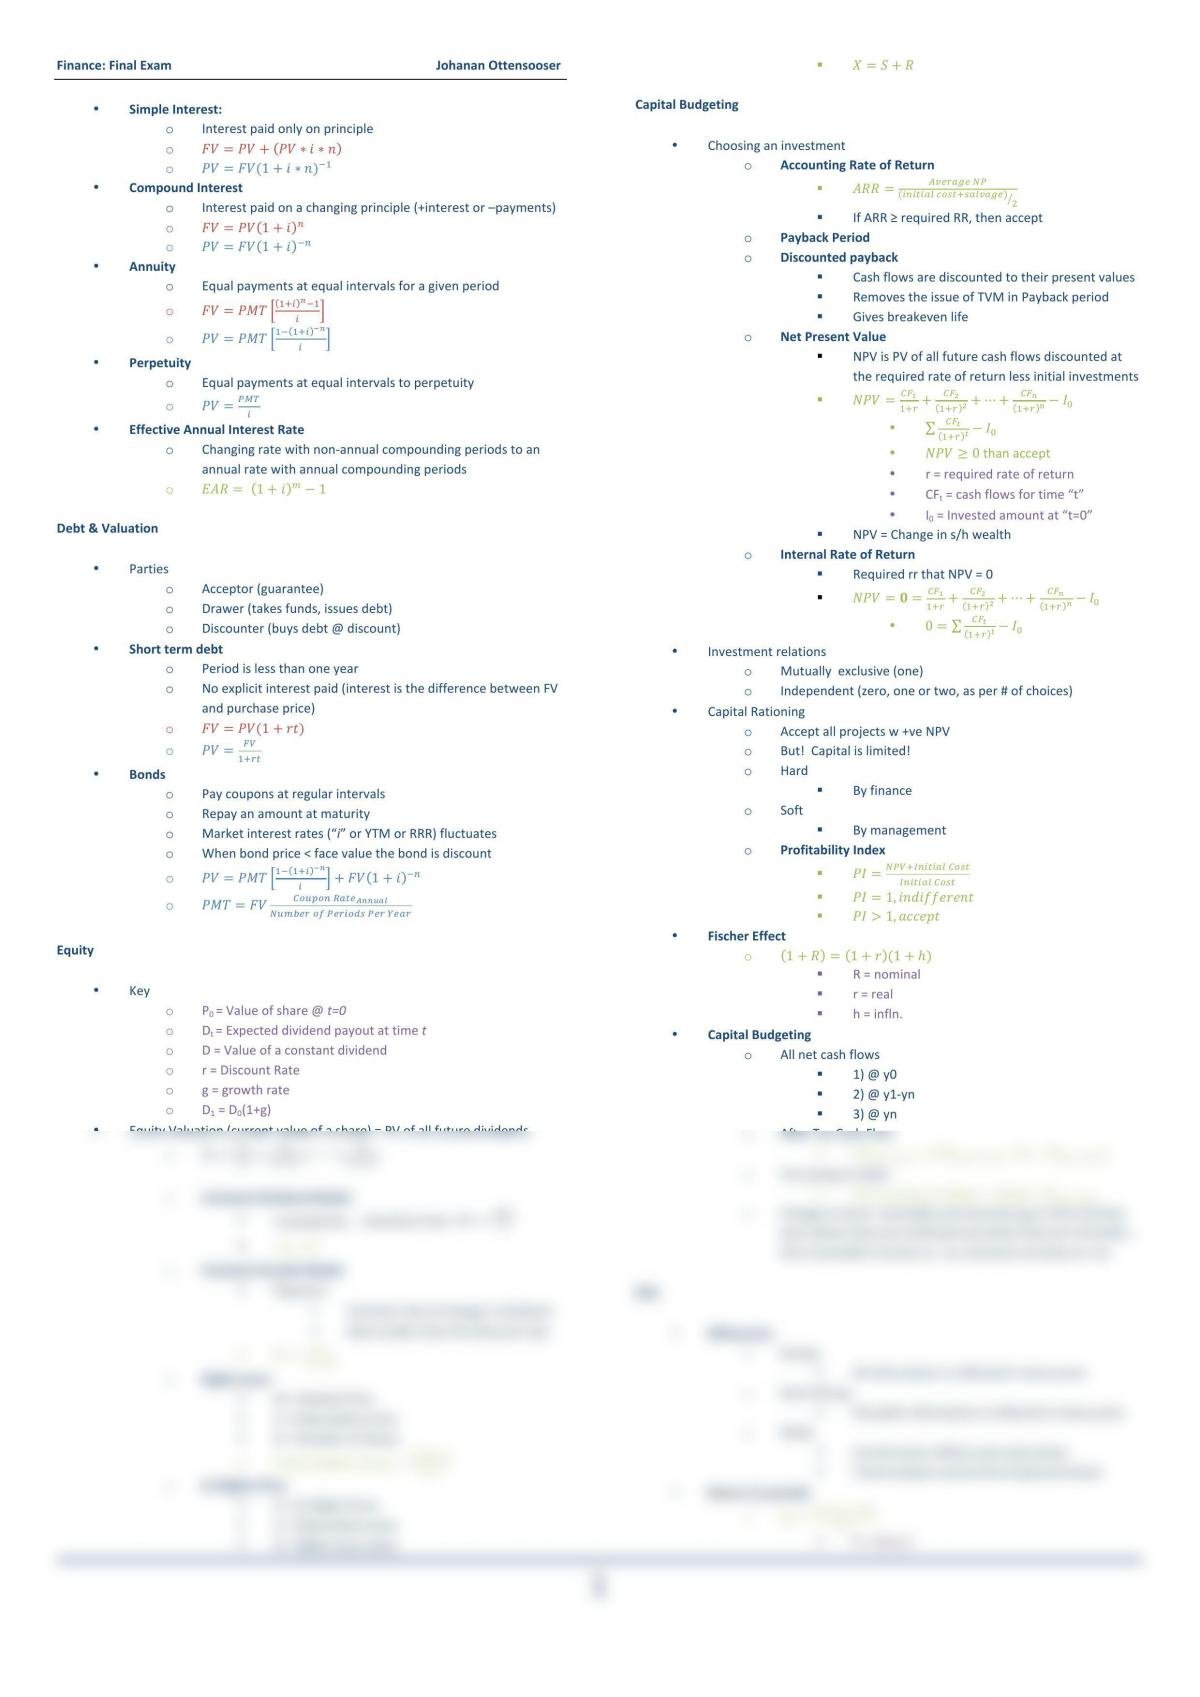 FBF - Mid and Final Exam notes/cheatsheet - Page 1